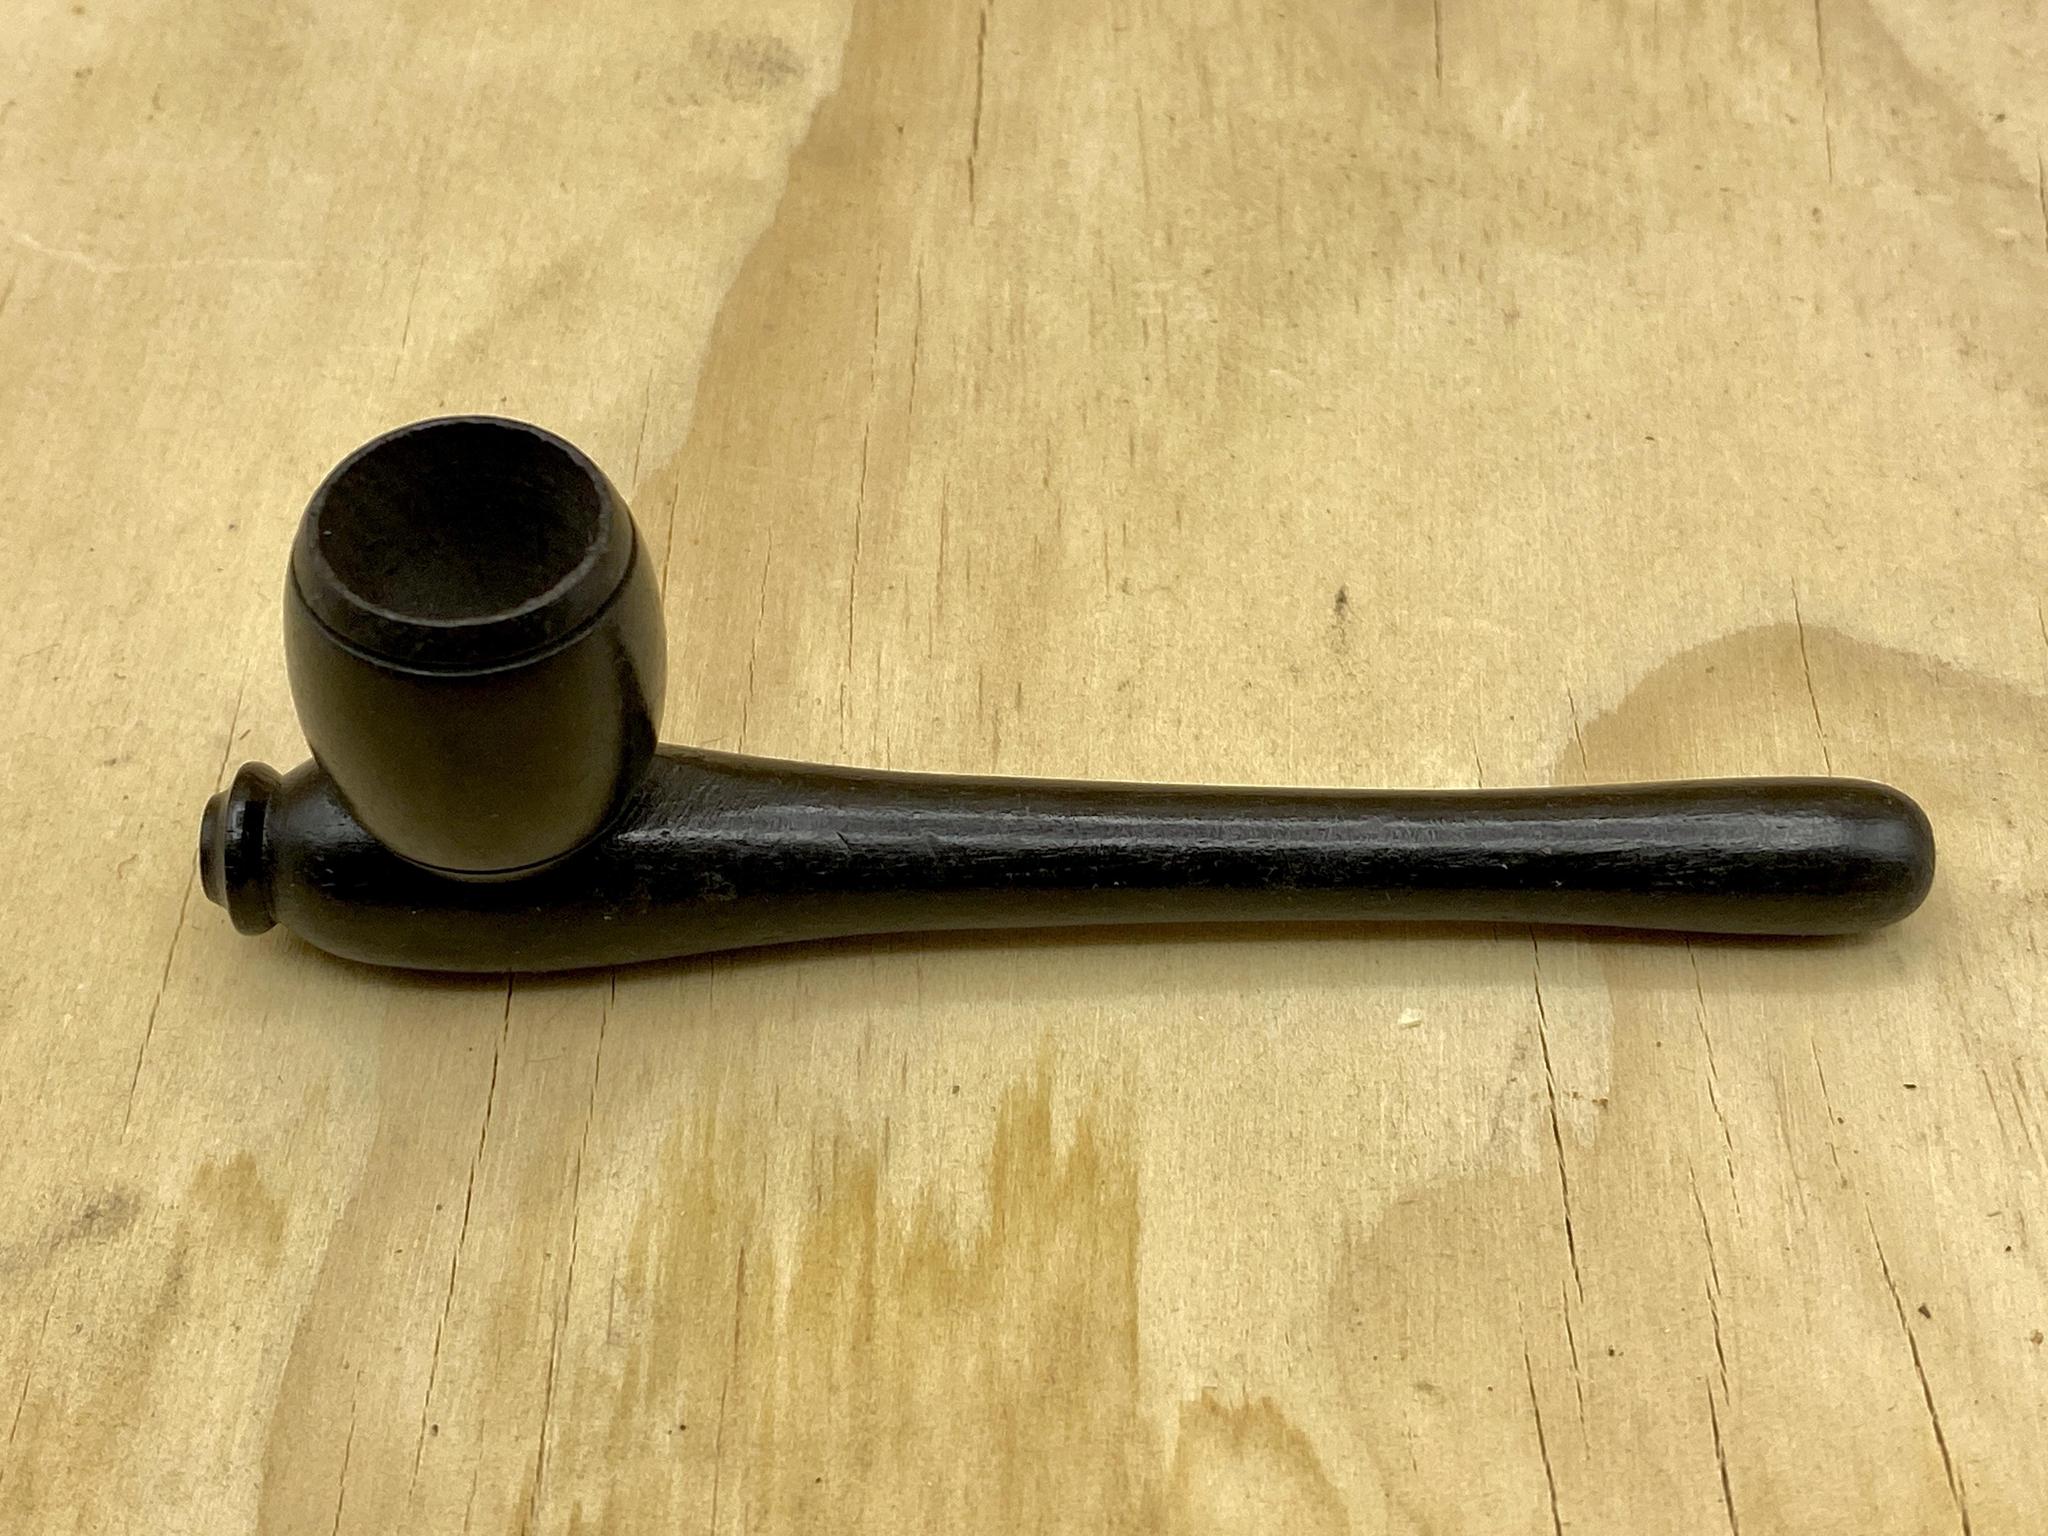 Sleek And Smooth Black Wood Pipe Sunflower Pipes Brooklyns Best